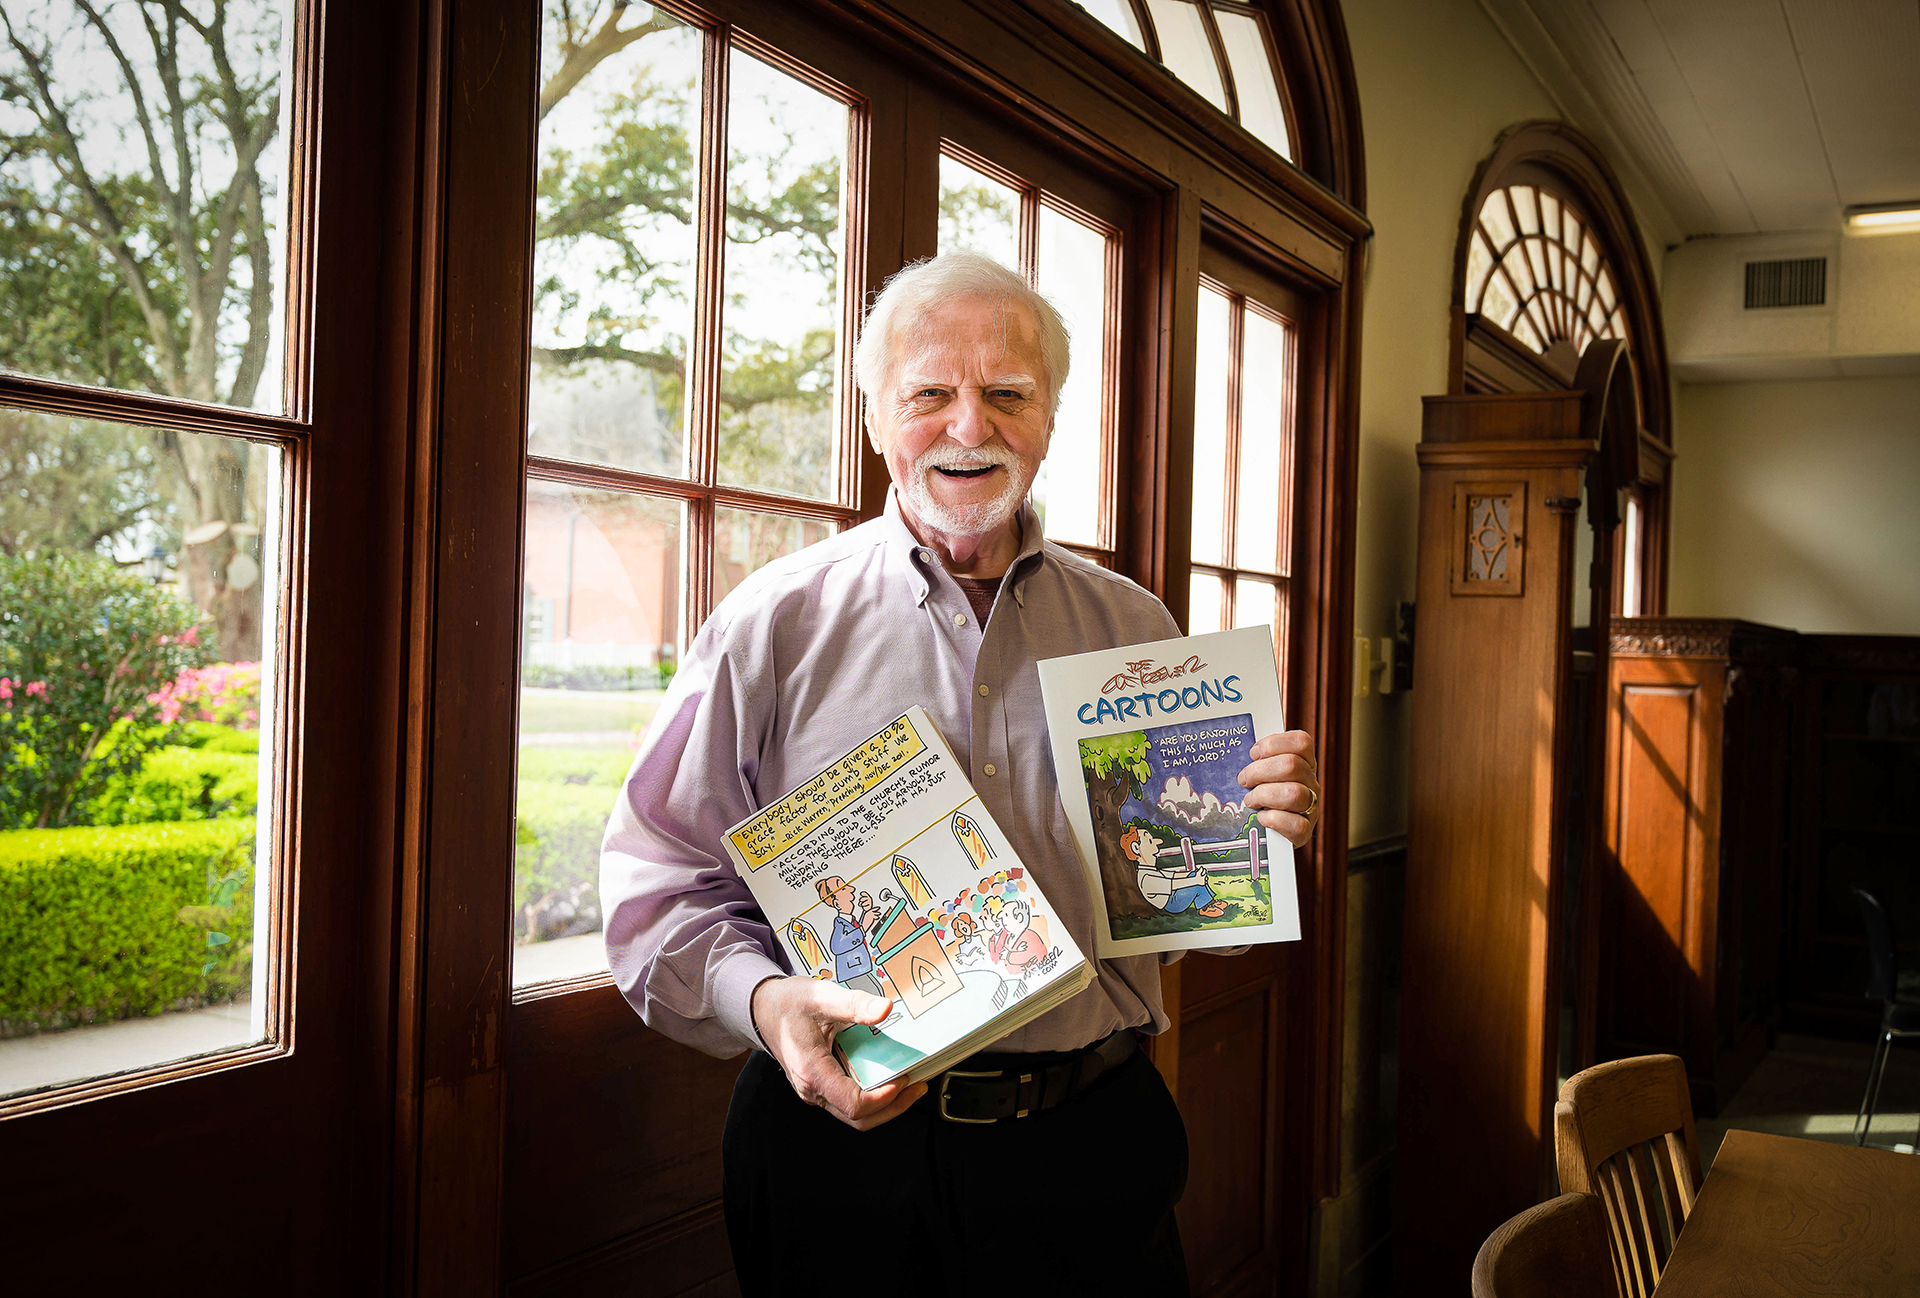 Joe McKeever, Well-Known Southern Baptist Cartoonist, Donates Entire Archive to New Orleans Baptist Theological Seminary